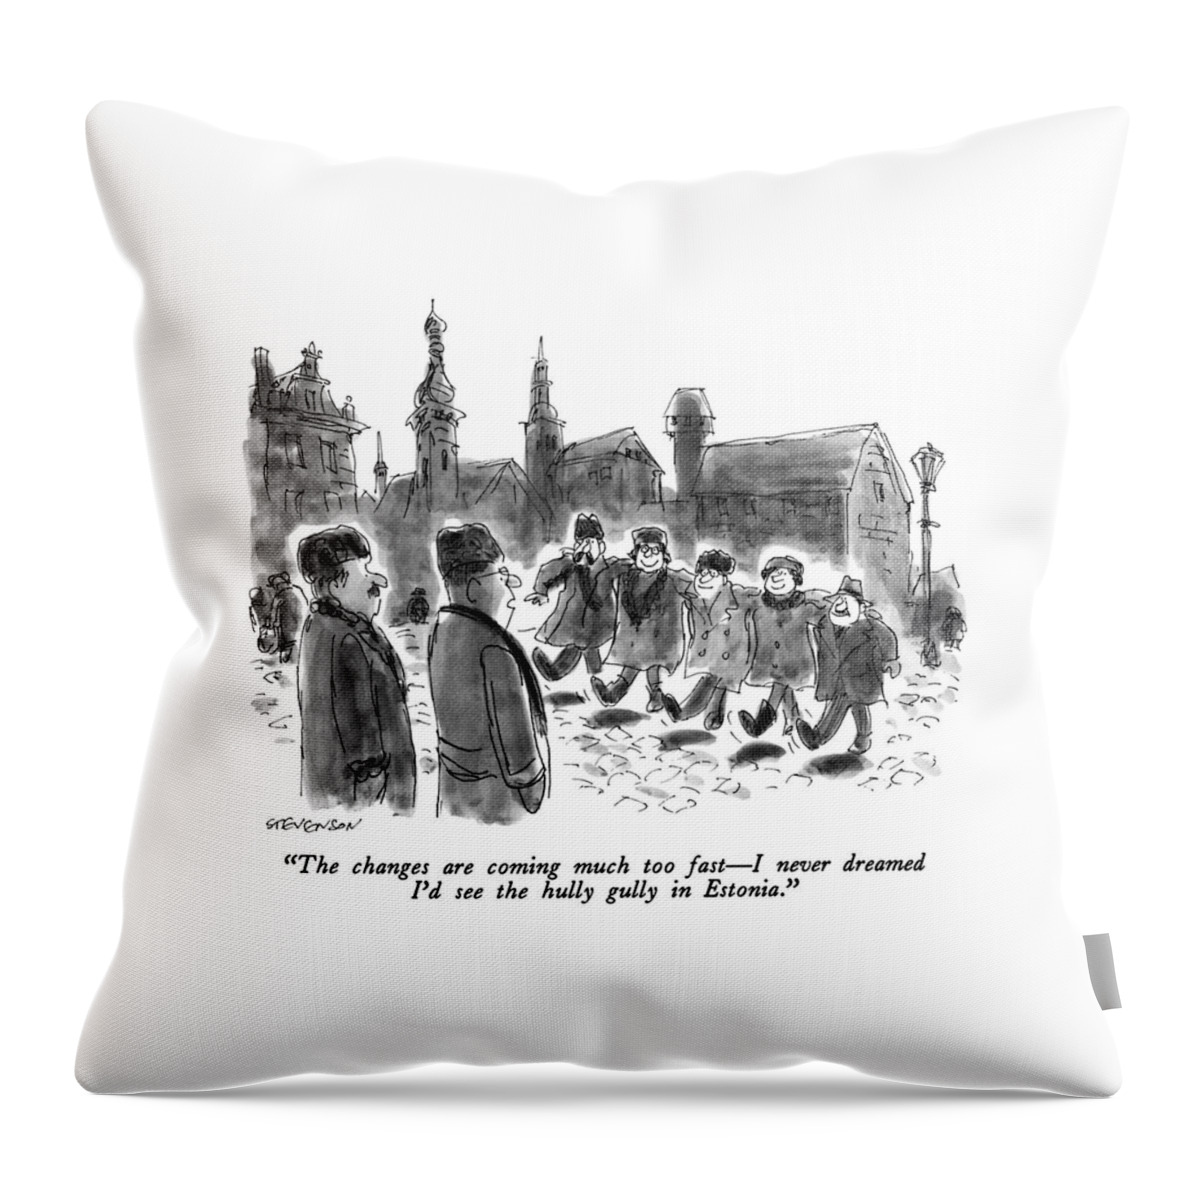 The Changes Are Coming Much Too Fast - Throw Pillow